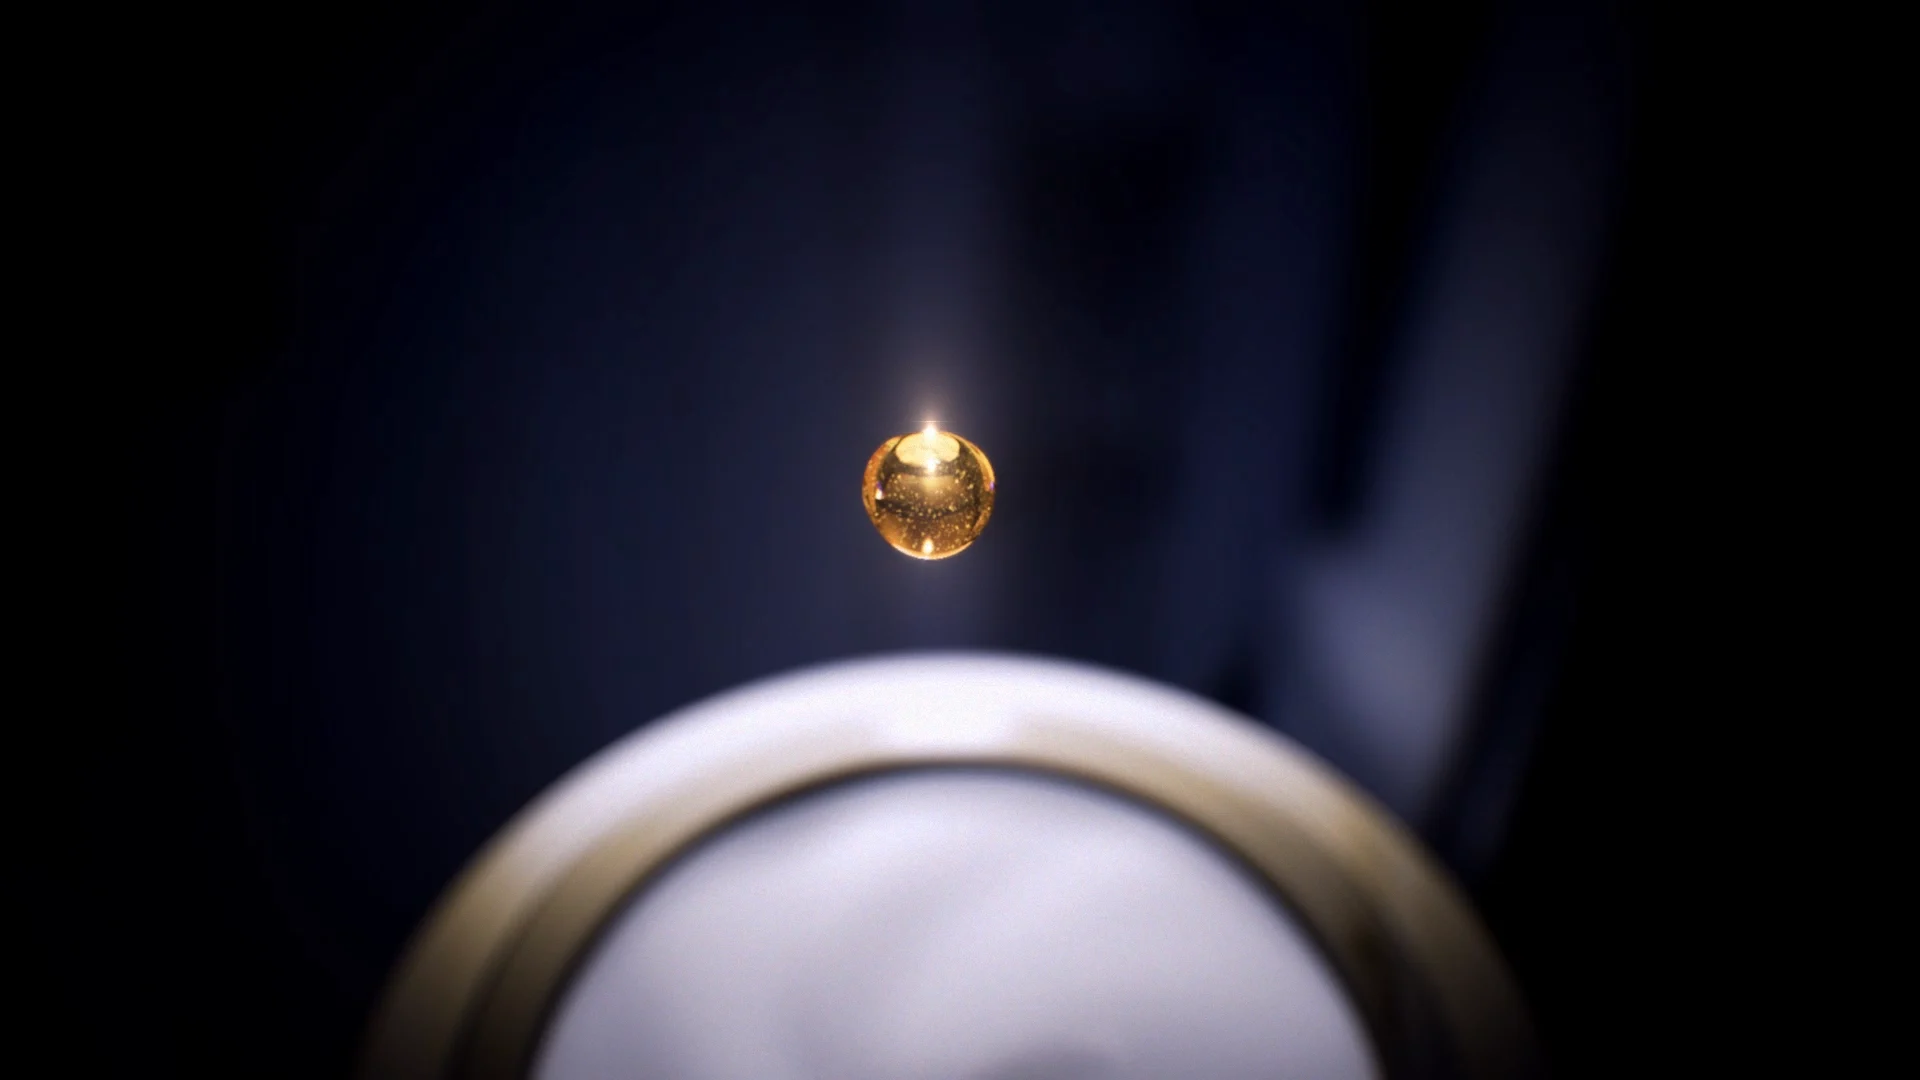 a golden drop in front of a black background falling into something white golden which is not recongnizable